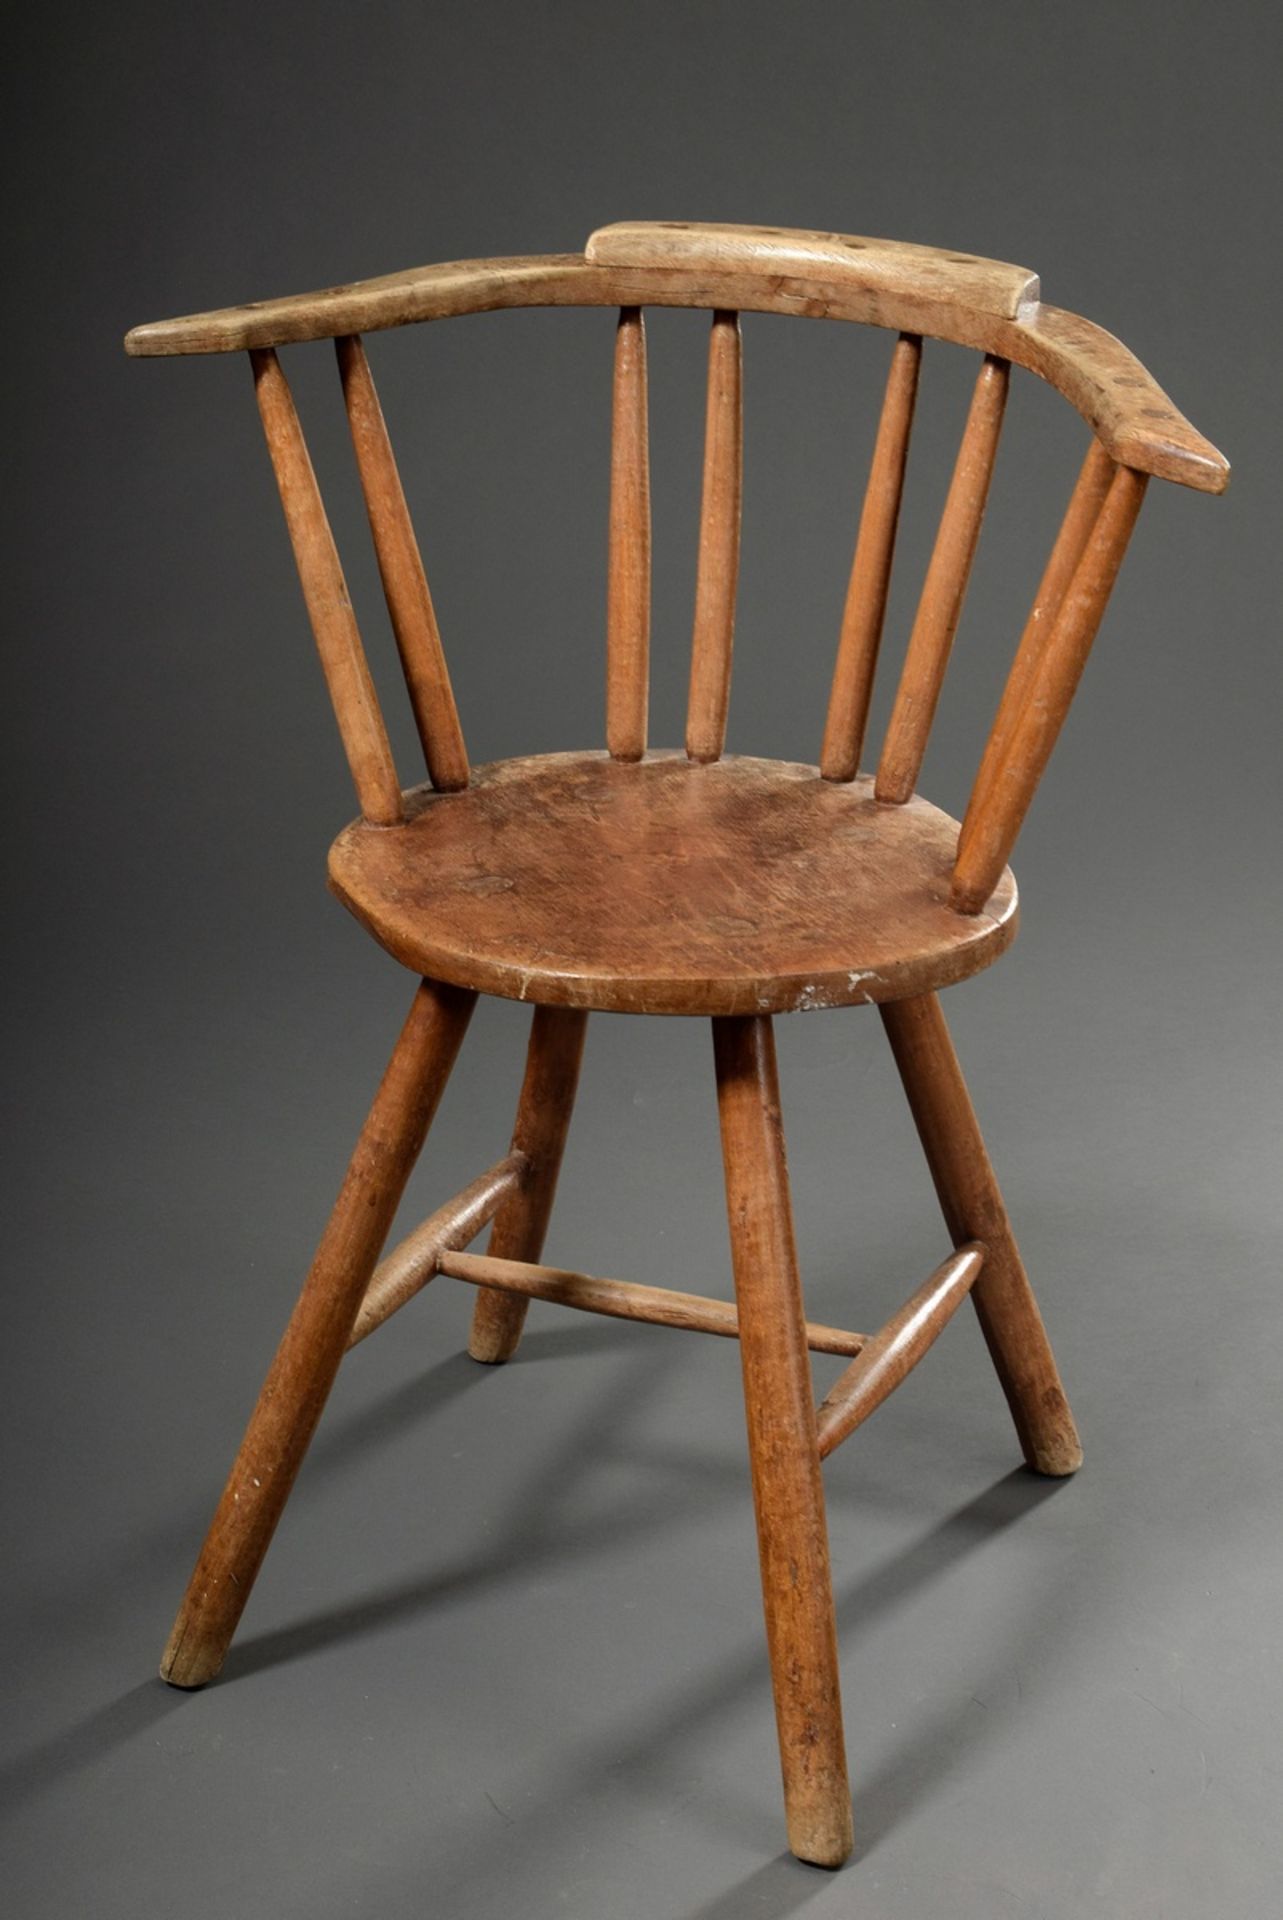 Country kitchen chair with semicircular backrest, soft wood, h. 45,5/76cm, traces of usage